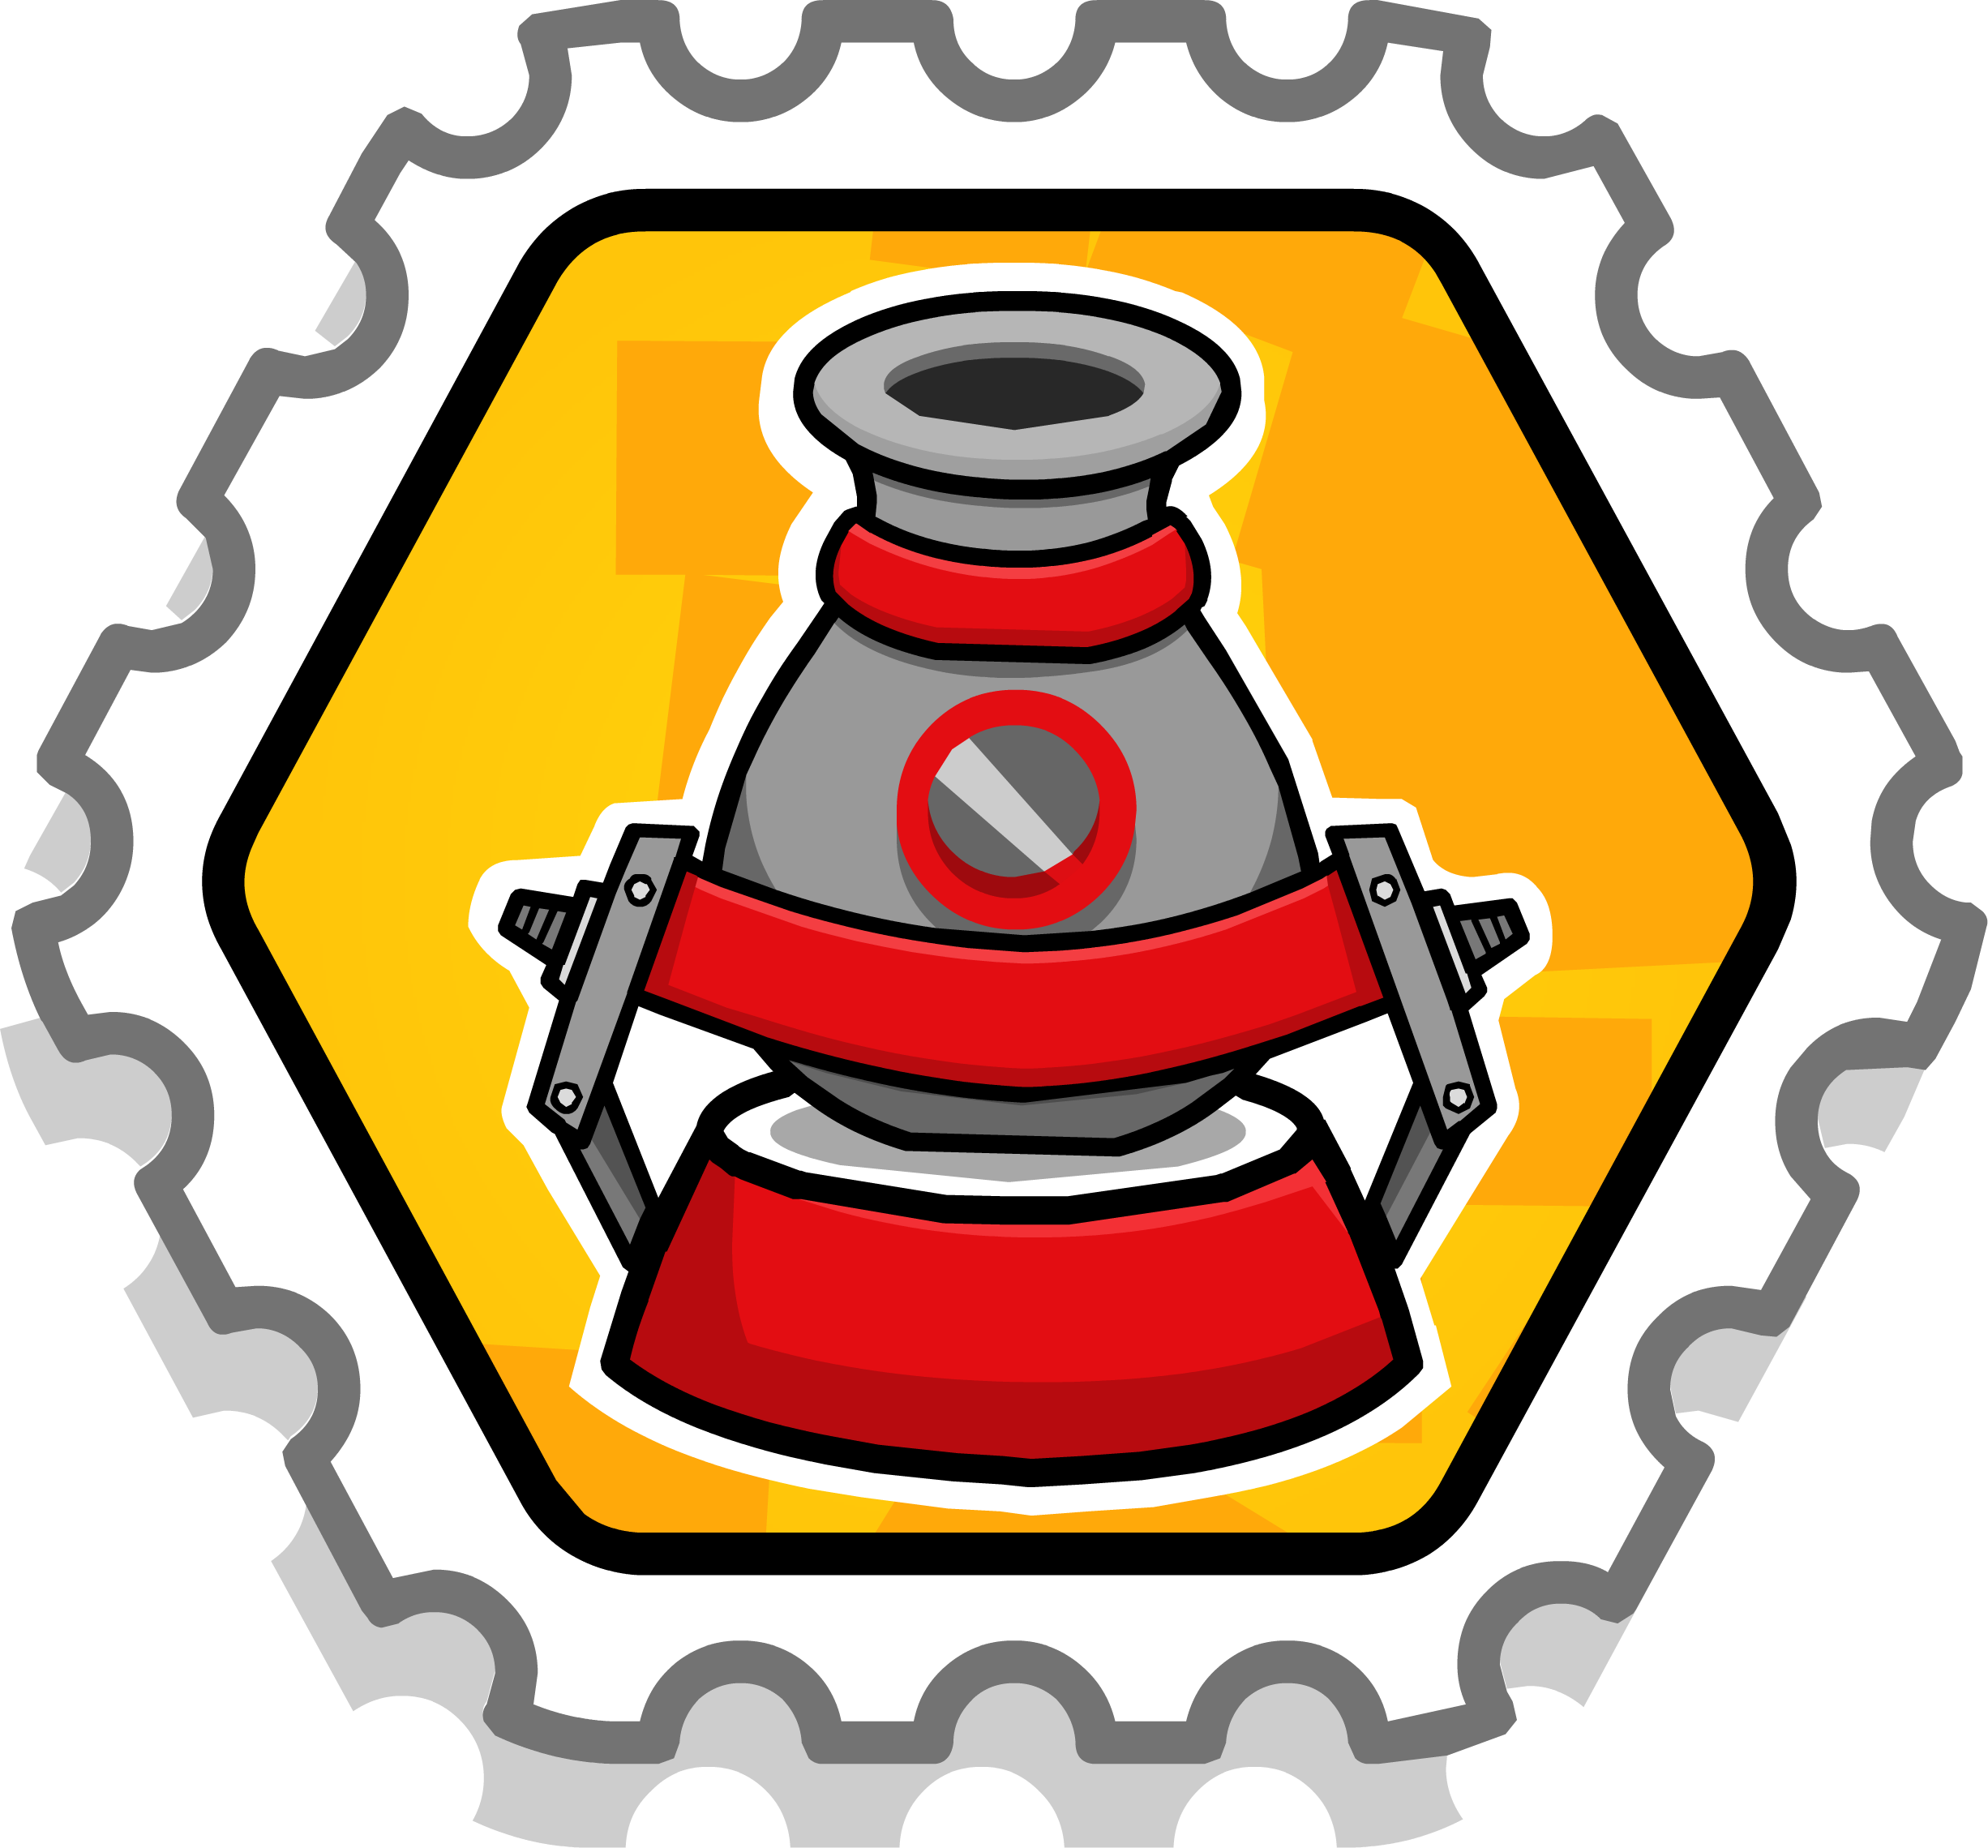 Launch Ready Stamp - Club Penguin Jetpack Adventure Stamp (2452x2279)